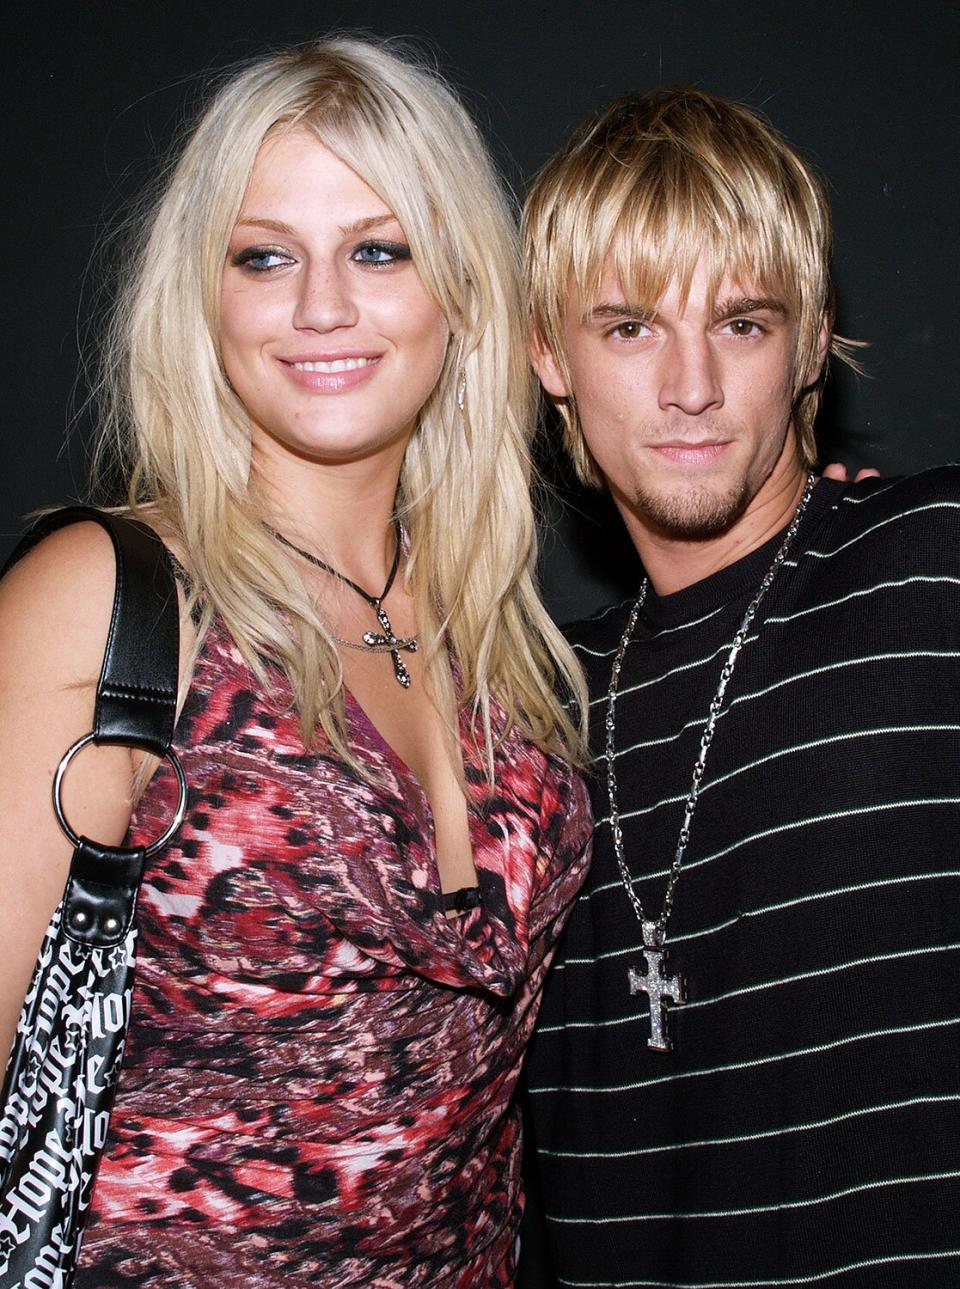 Aaron Carter 'Never Really Dealt with a Lot of Trauma' from Sister and Father's Deaths, Says Source